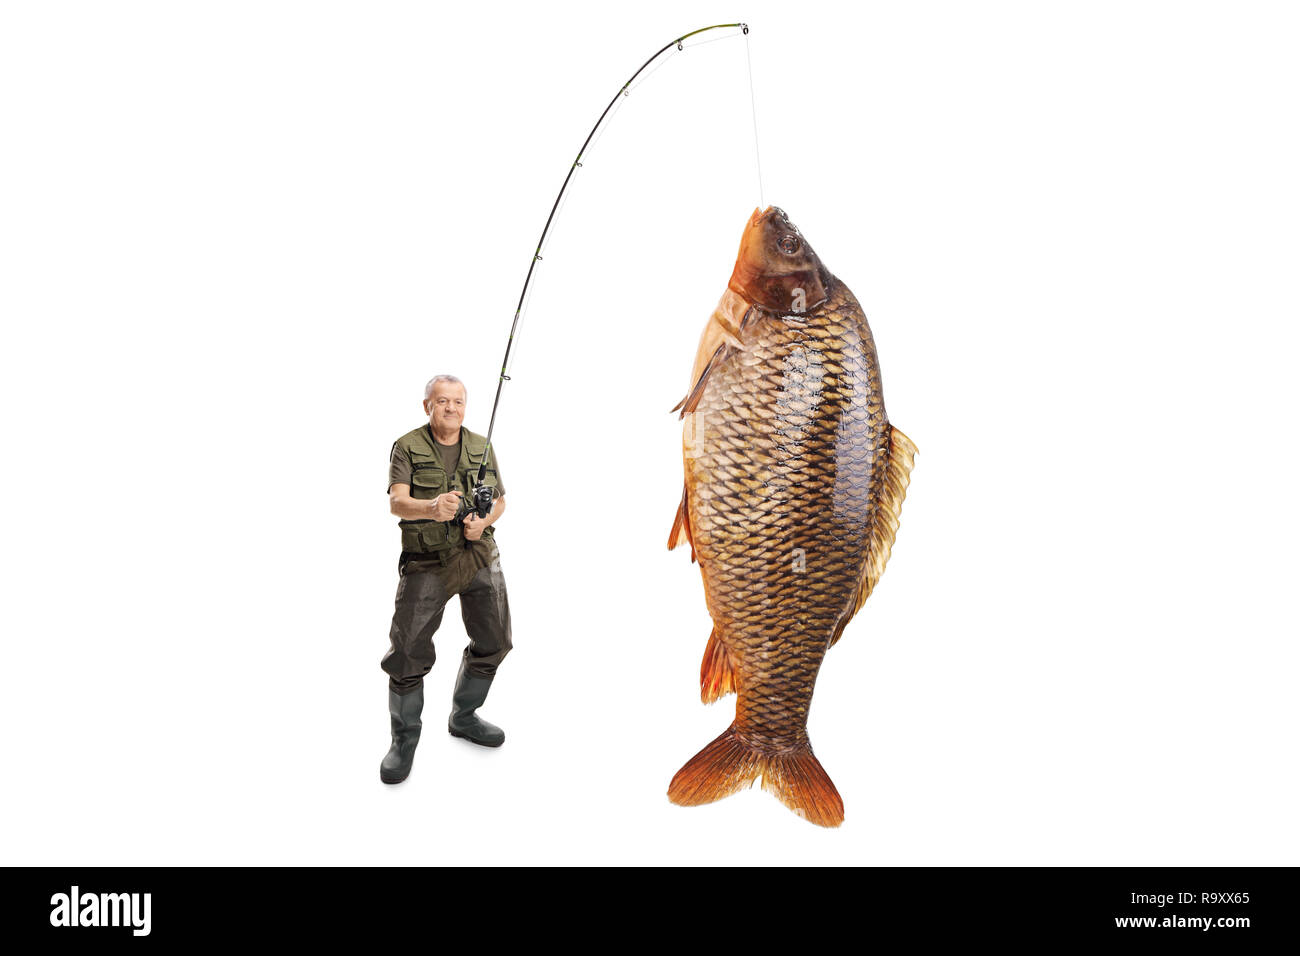 https://c8.alamy.com/comp/R9XX65/full-length-portrait-of-a-mature-fisherman-with-a-carp-fish-on-a-fishing-rod-isolated-on-white-background-R9XX65.jpg